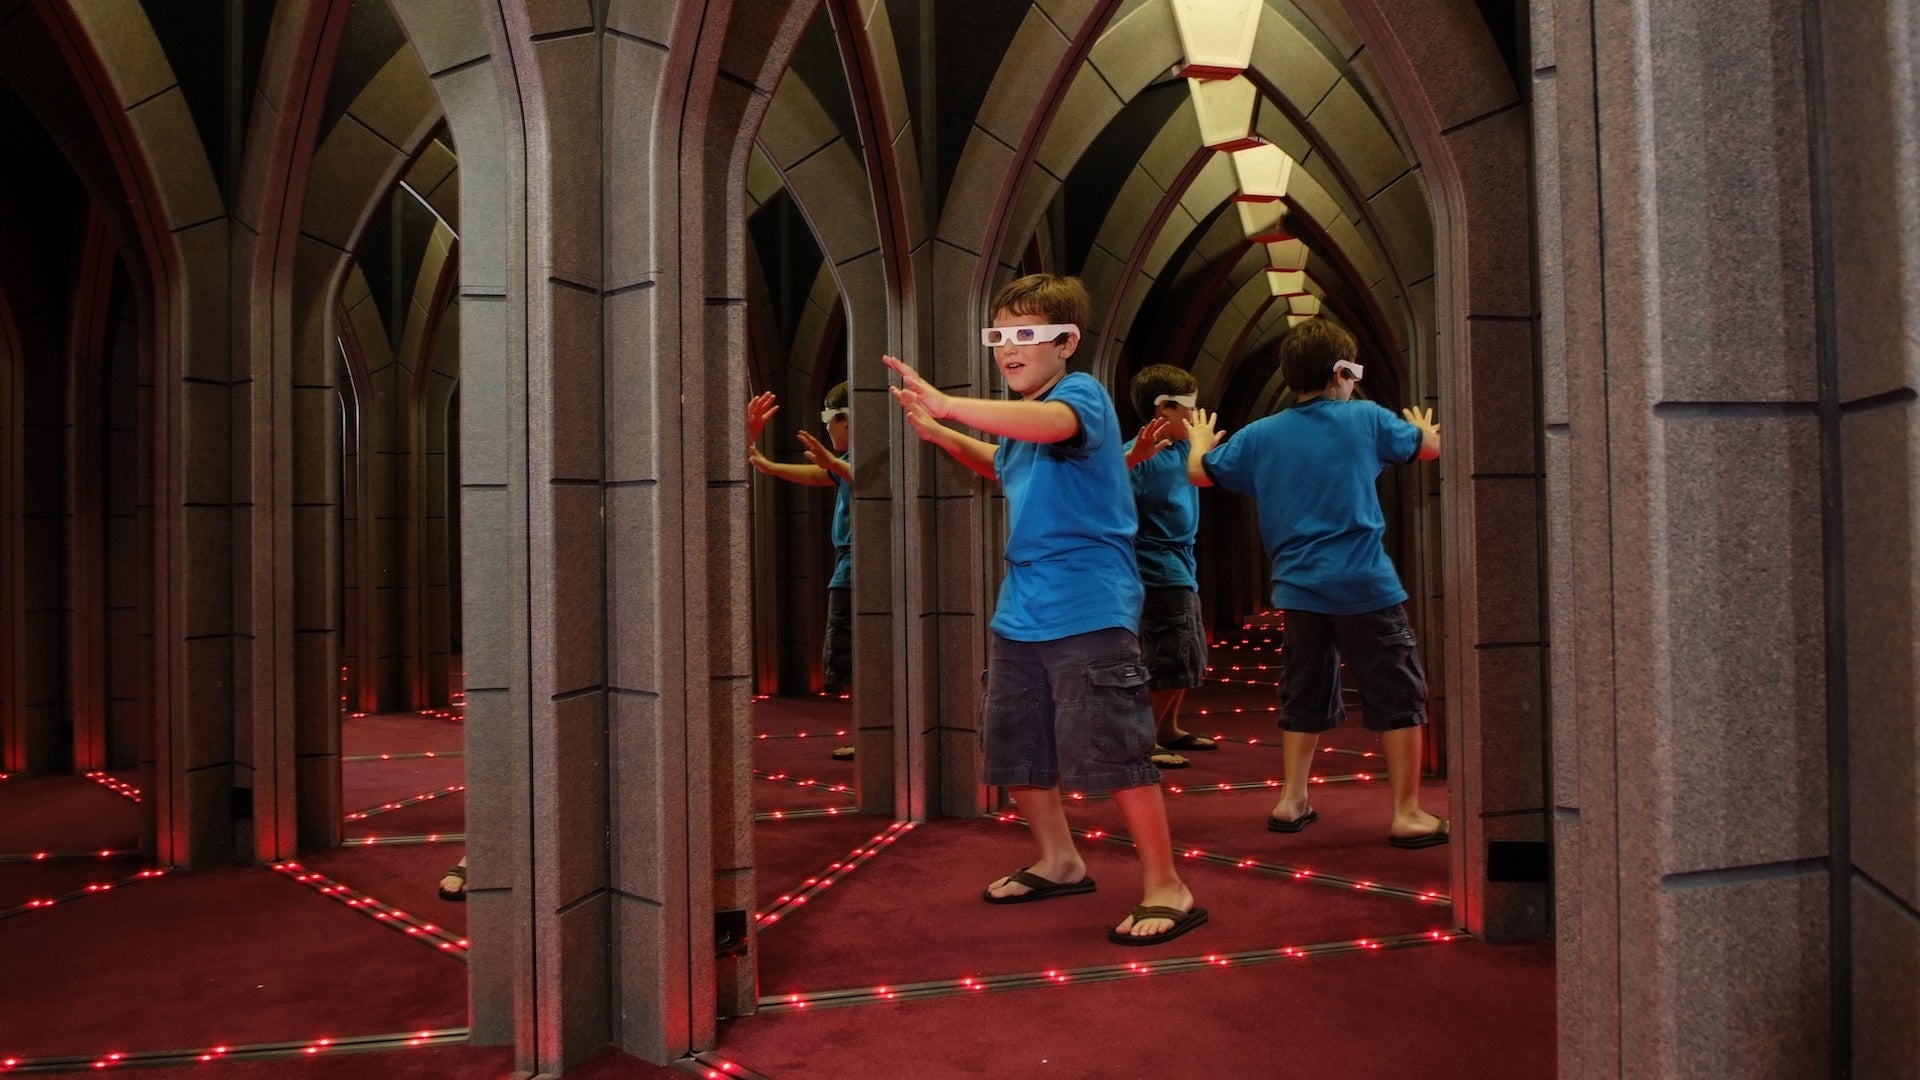 Boy in a blue shirt and 3D glasses on in a mirror room with his arms stretched out in front of him